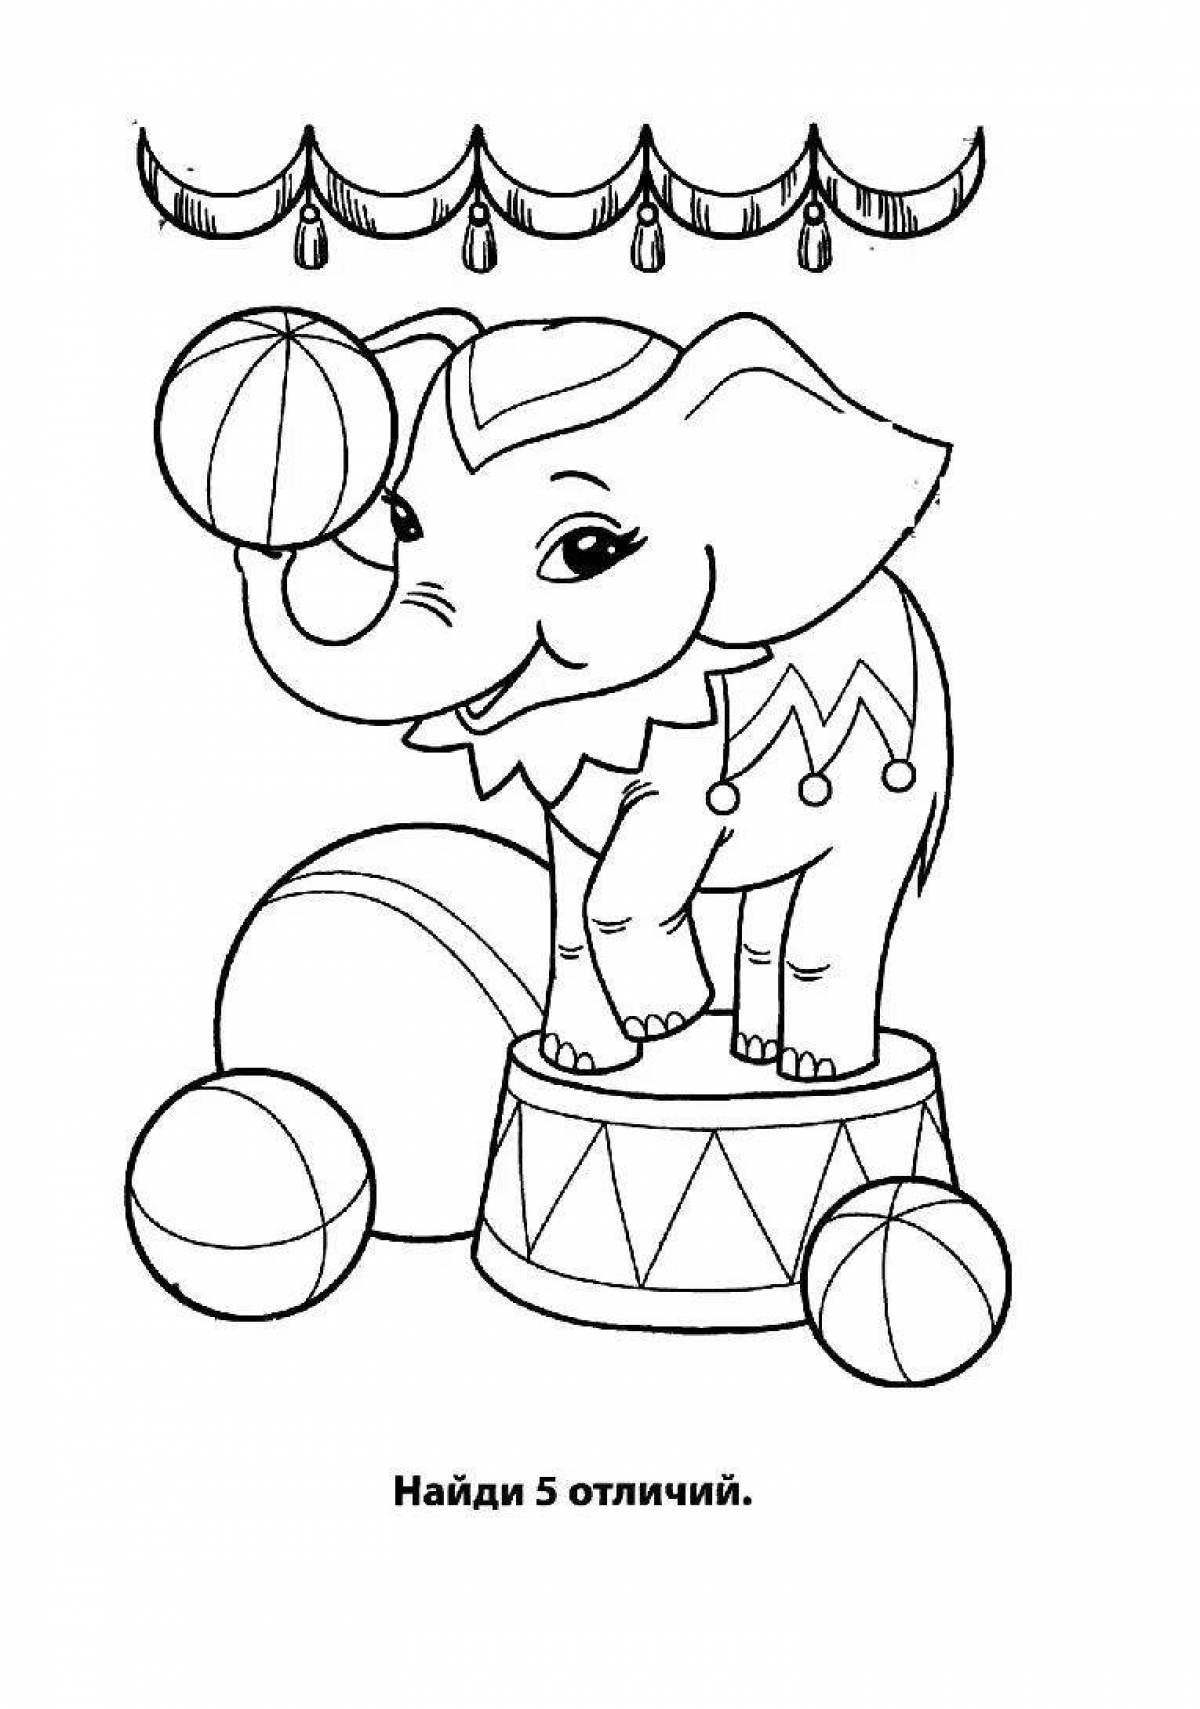 Coloring book cheerful circus elephant